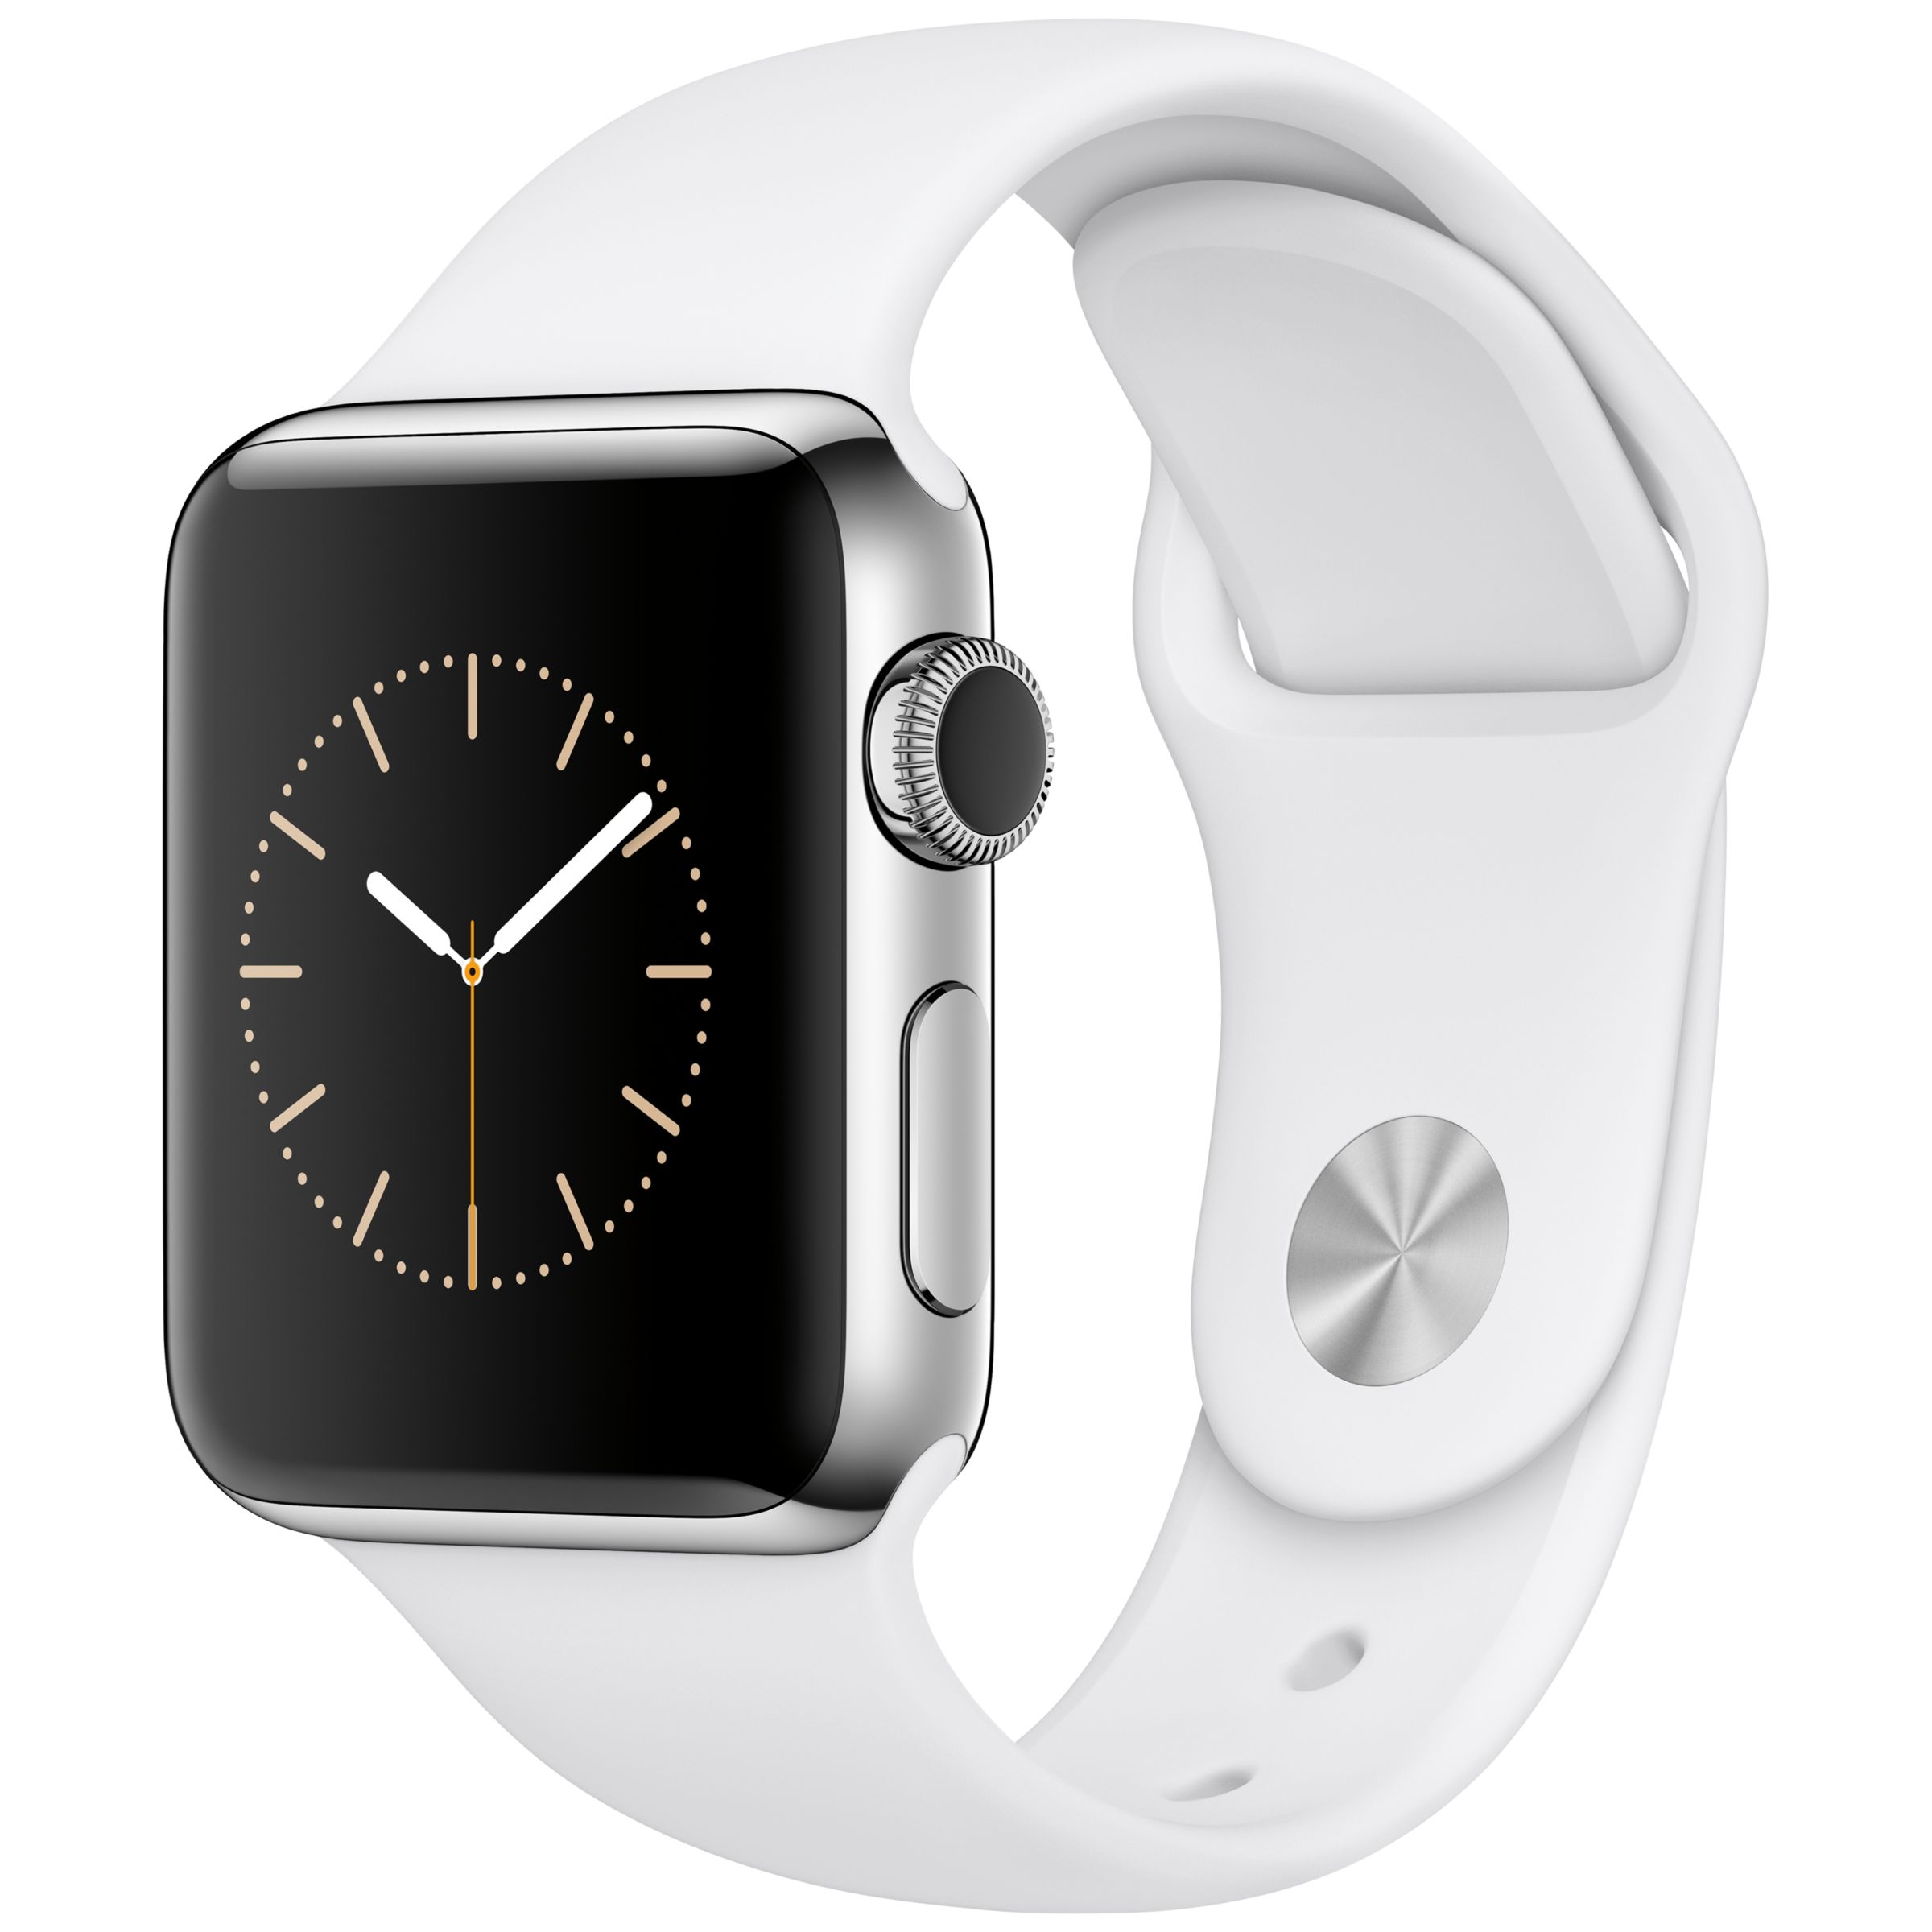 Apple Watch Series 2, 38mm Stainless Steel Case with Sport Band, White